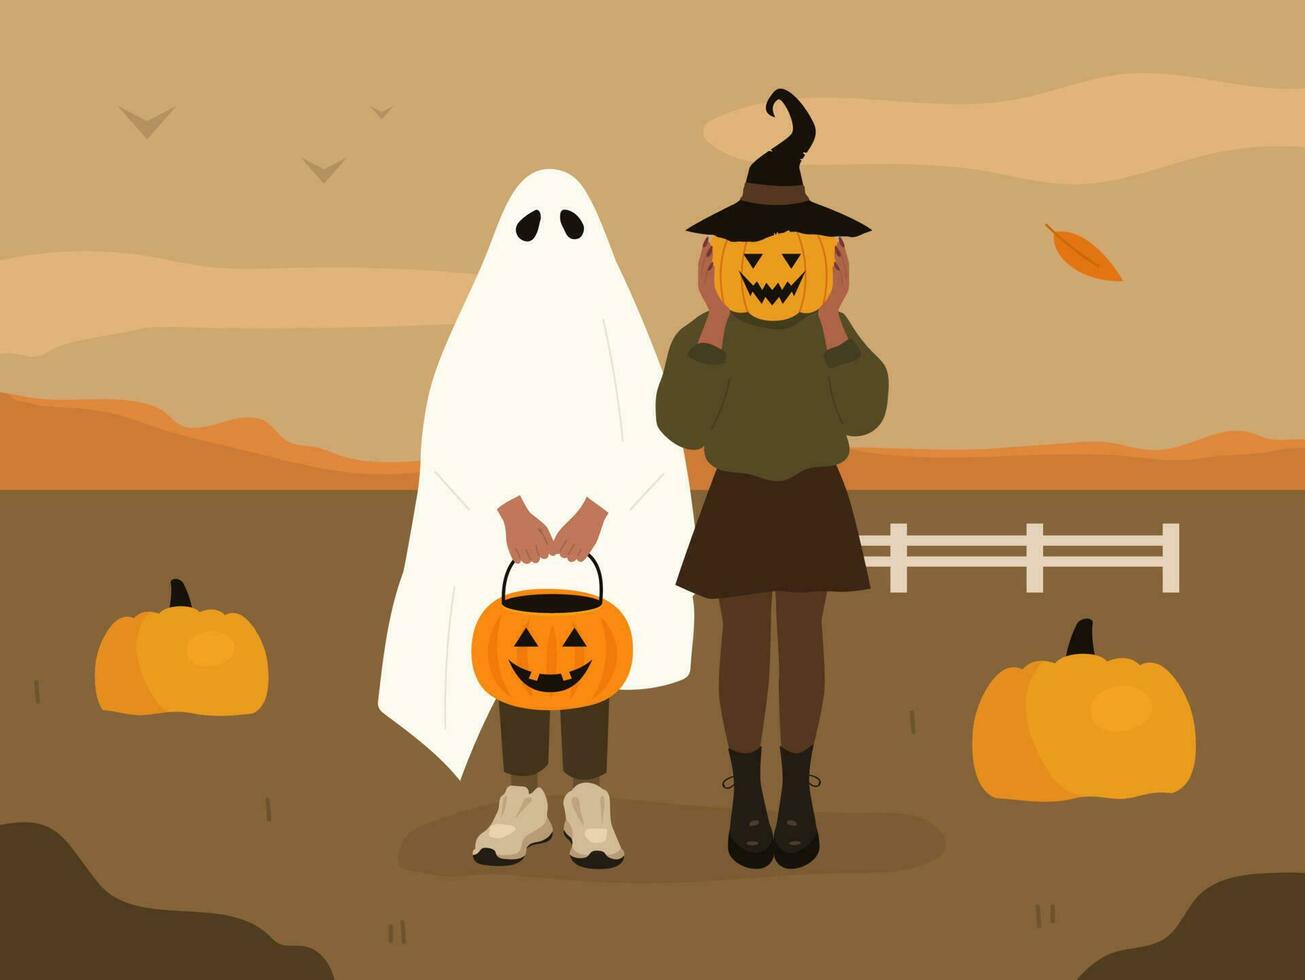 Halloween costumes. Pumpkin head and Ghost. Fall autumn nature background. Vector